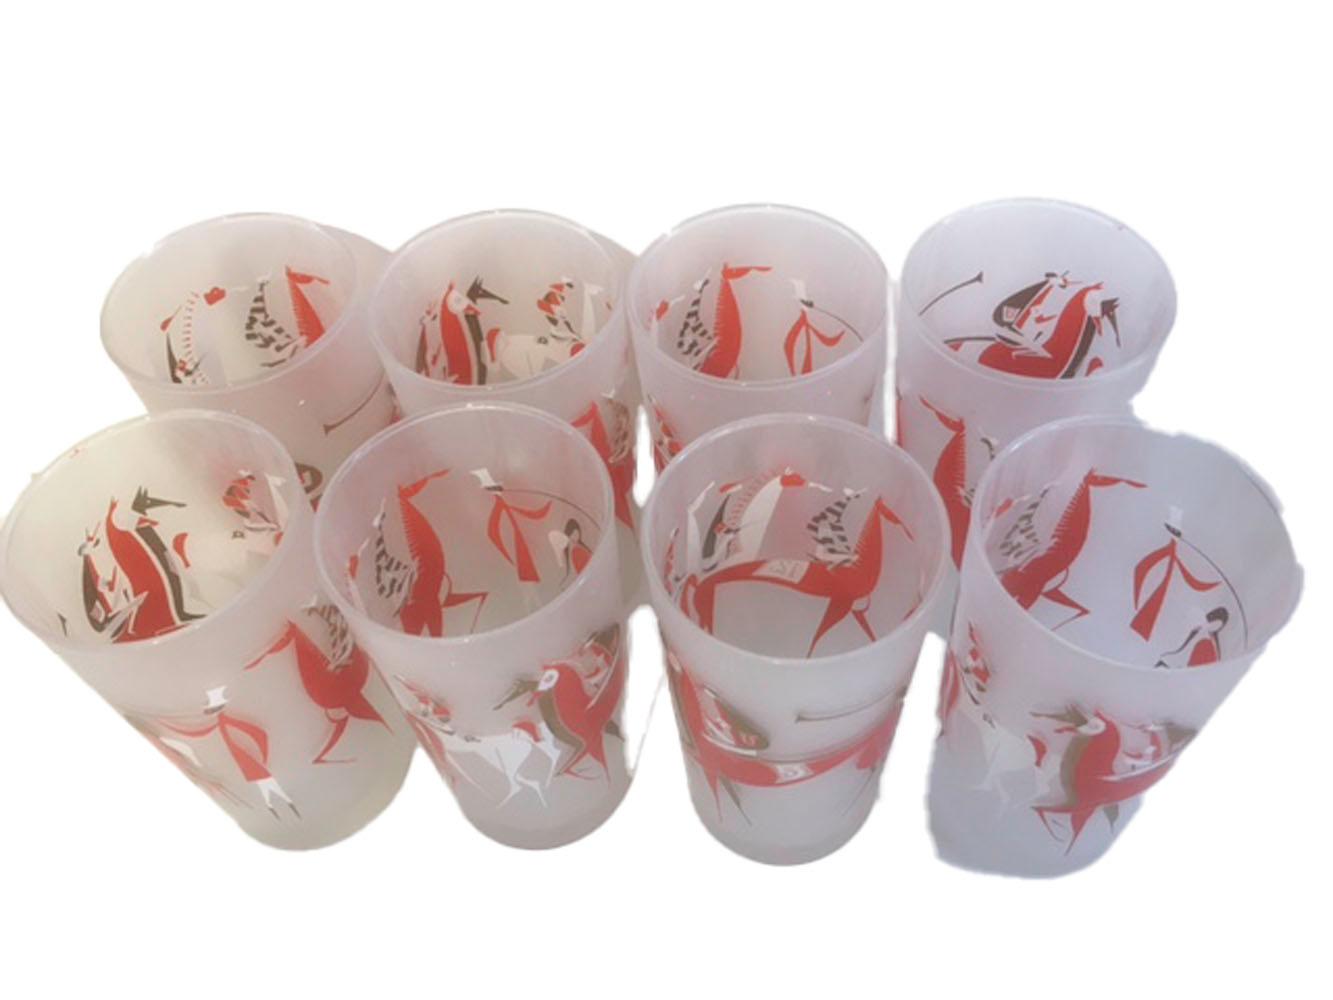 Set of Libbey Glass Co., highball glasses in the Longchamps pattern. Decorated in orange and white enamel with 22k gold on a frosted ground, having stylized race horses and jockeys being announced by a bugler. This set comes with its original